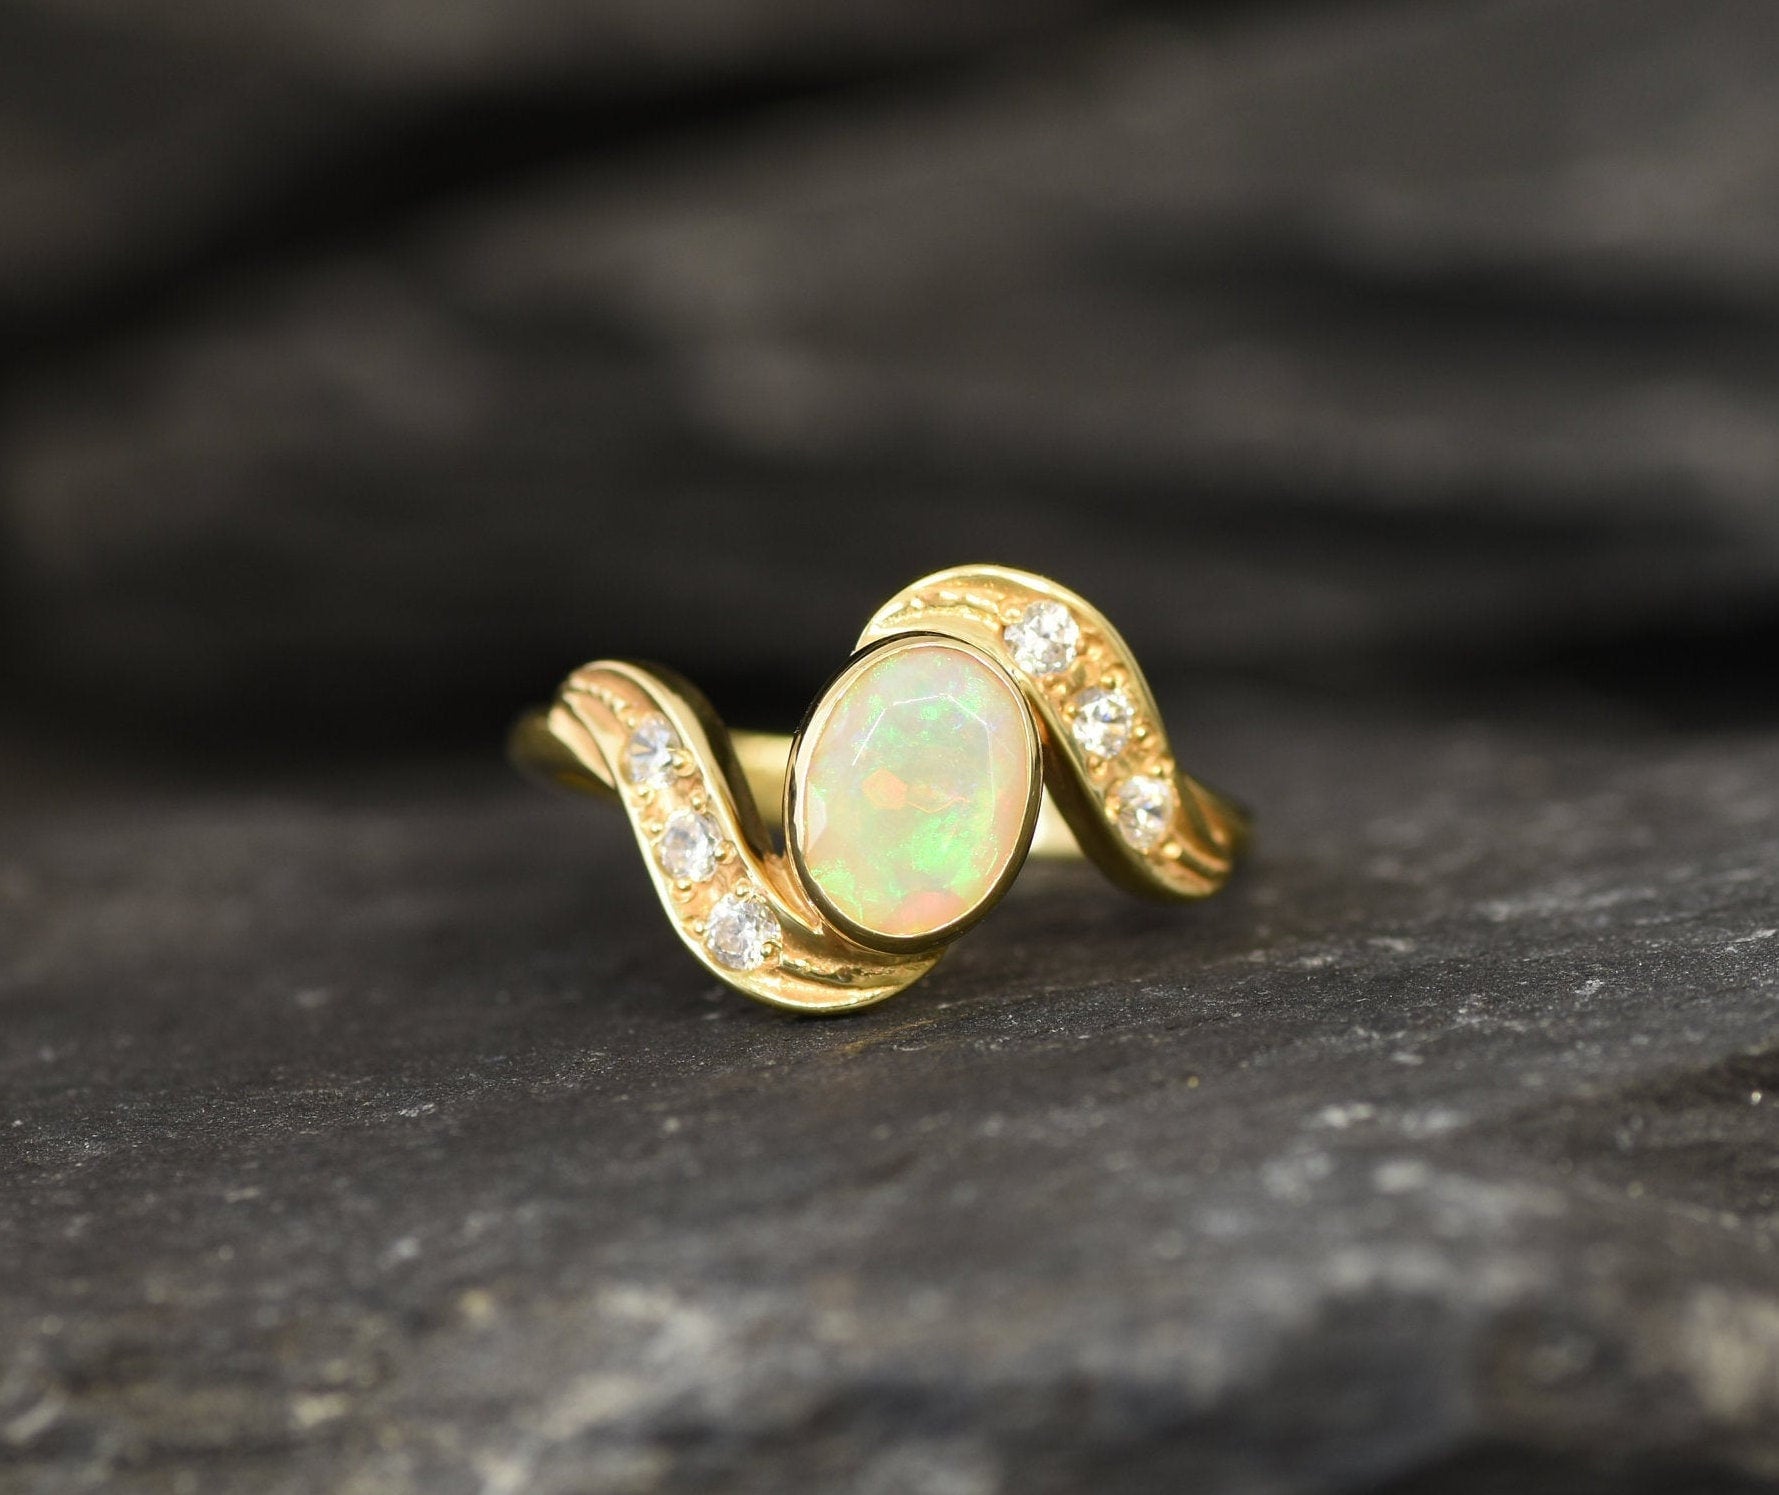 Gold Opal Ring, Natural Opal, Fire Opal Ring, Antique Ring, Gold Plated Ring, Bypass Band, 2 Carat Opal Ring, Proposal Ring, Vermeil Ring